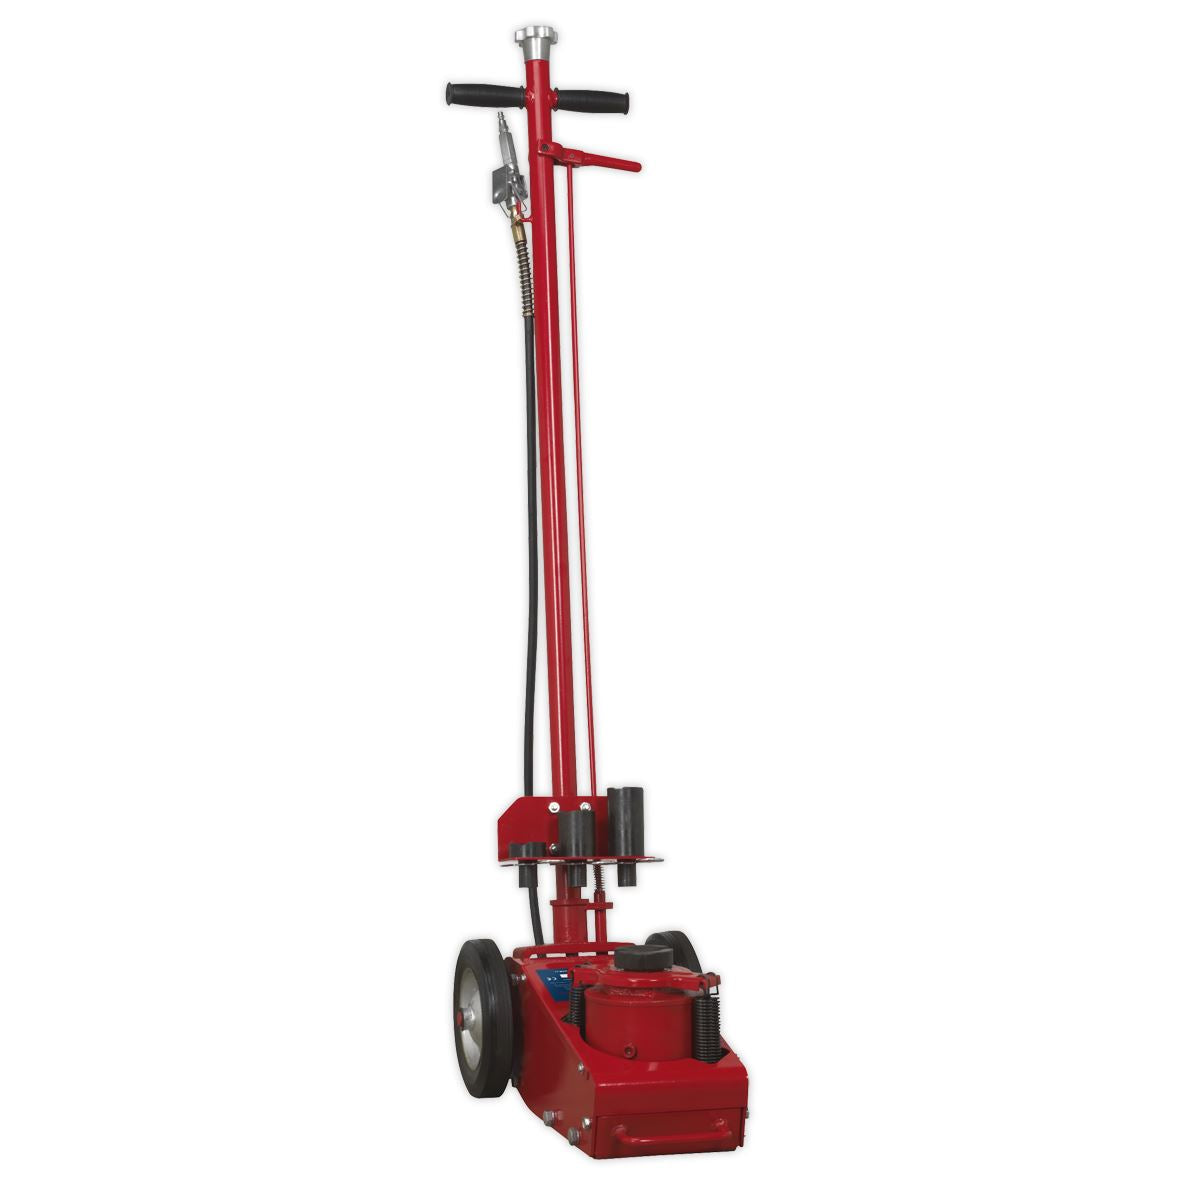 Sealey Air Operated Single Stage Trolley Jack 20 Tonne